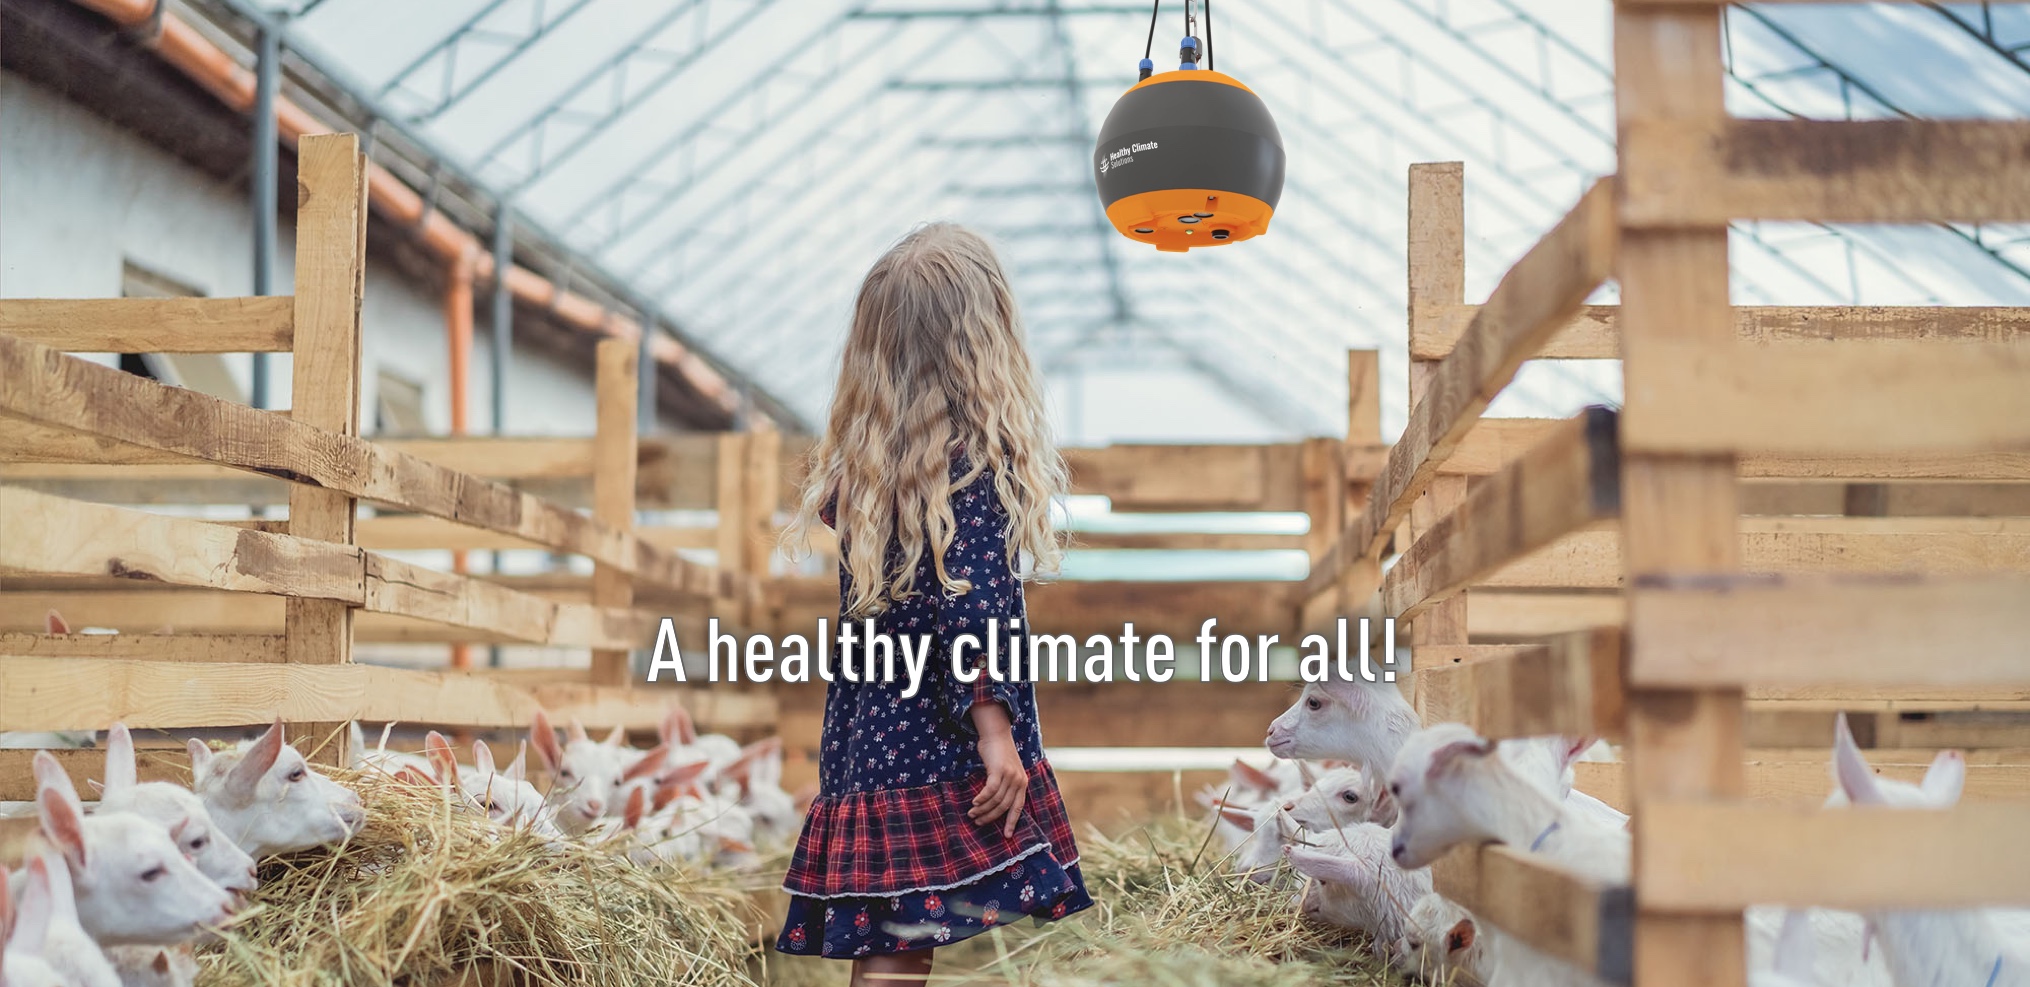 A healthy climate for all!